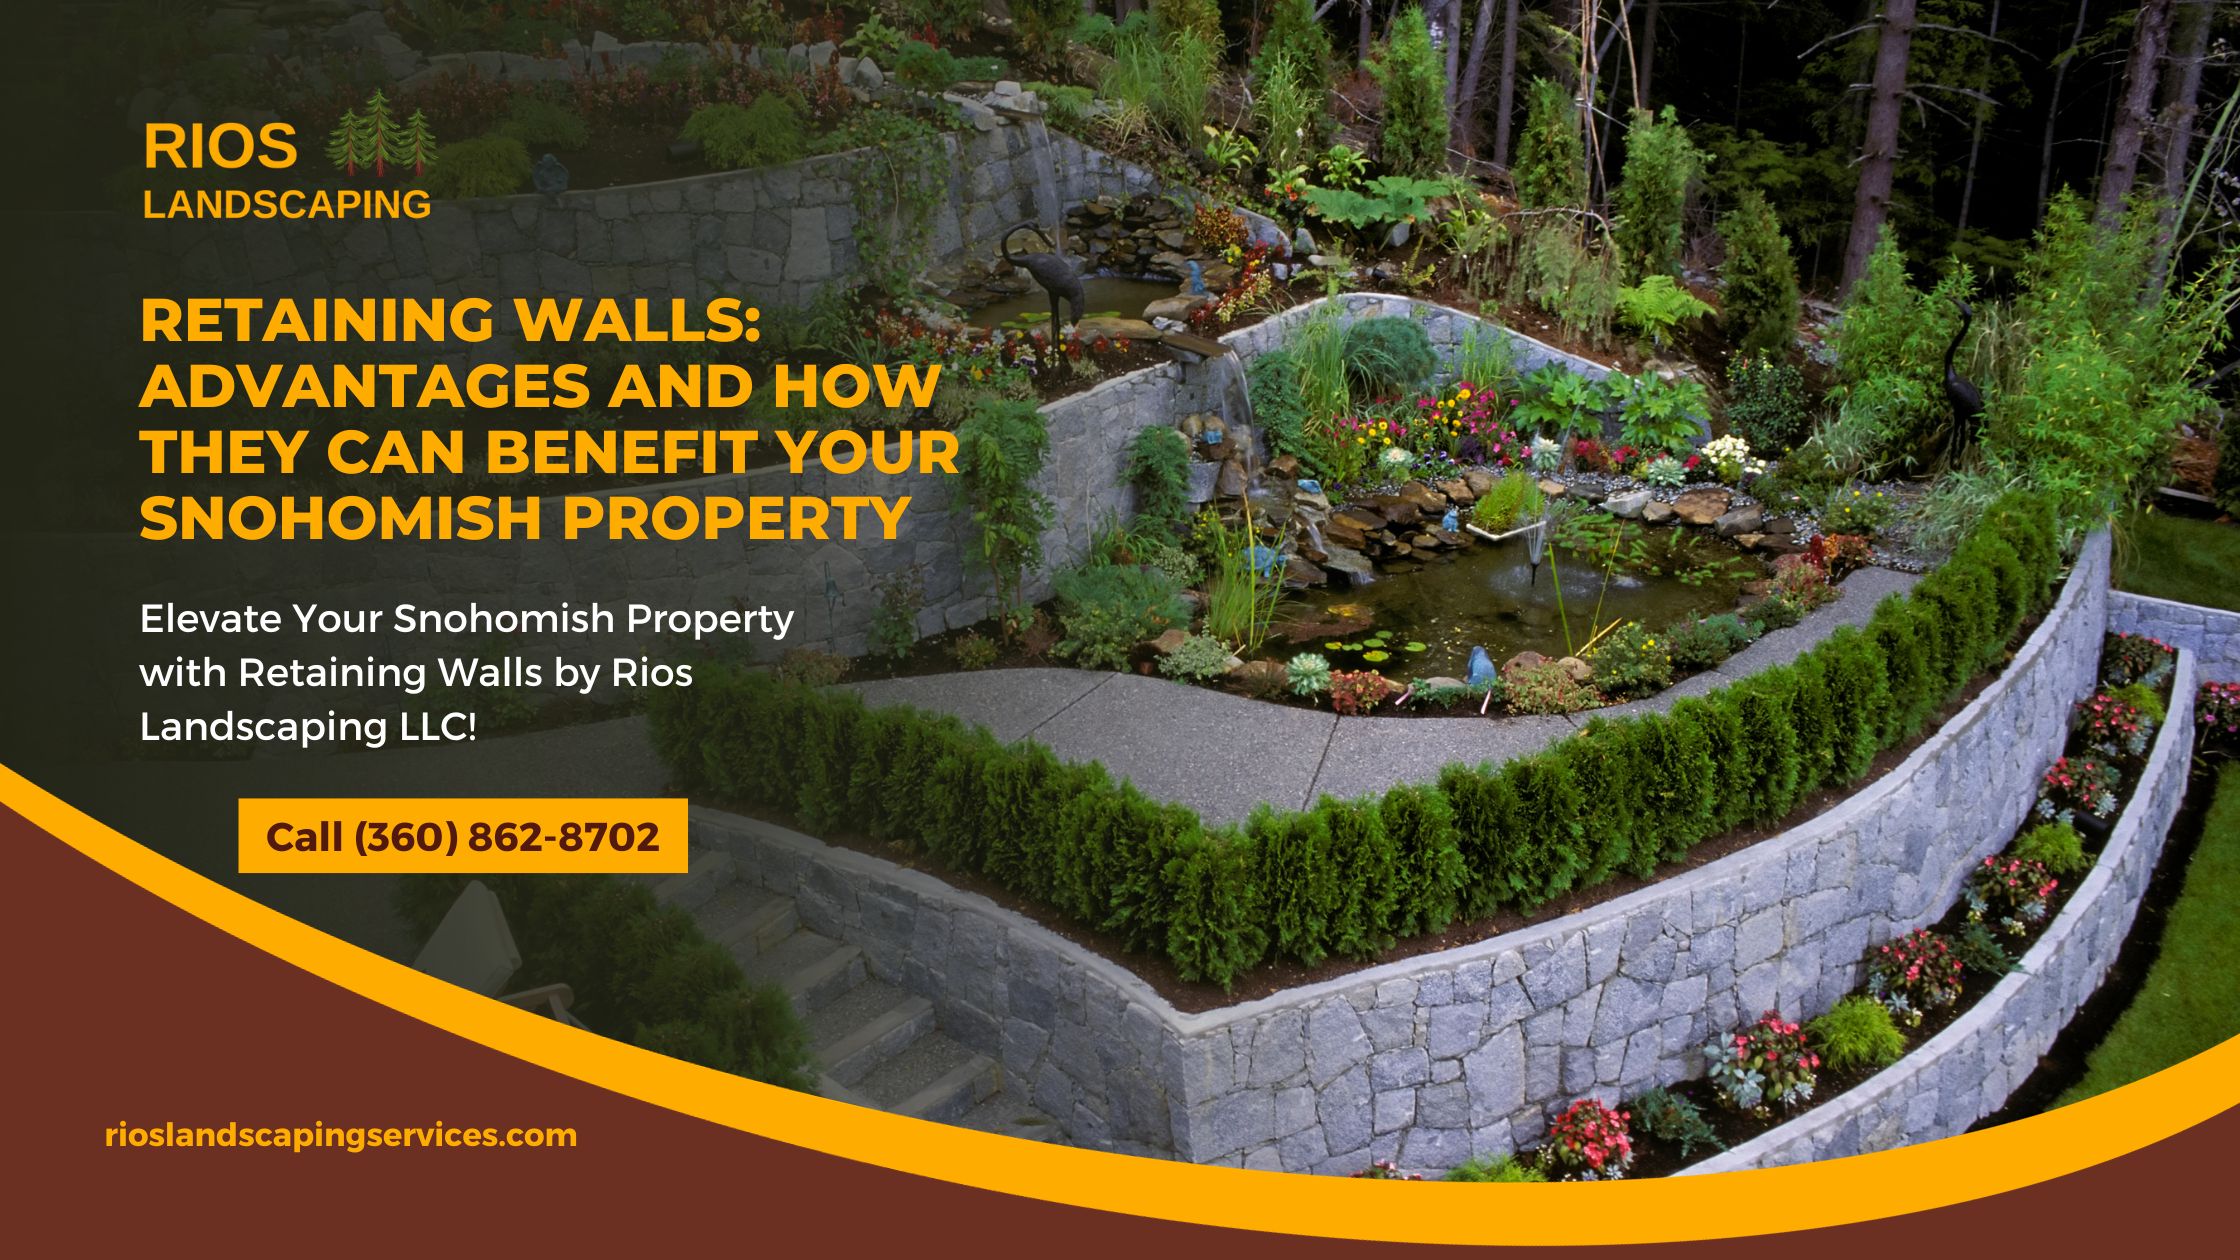 Retaining Walls: Advantages and How they Can Benefit your Snohomish Property